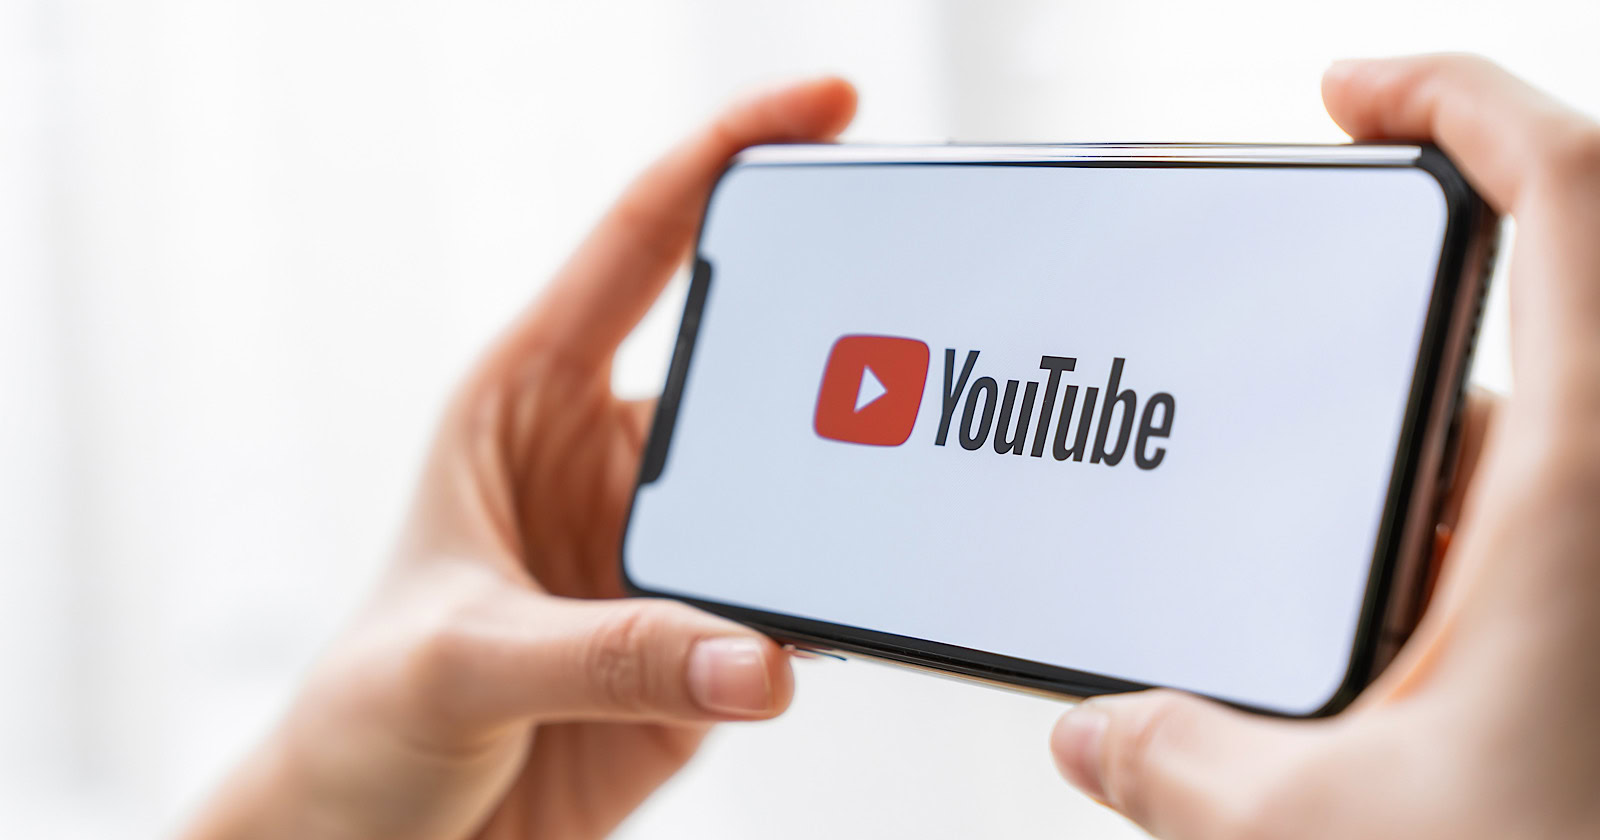 YouTube Rolls Out Thumbnail A/B Testing To All Channels